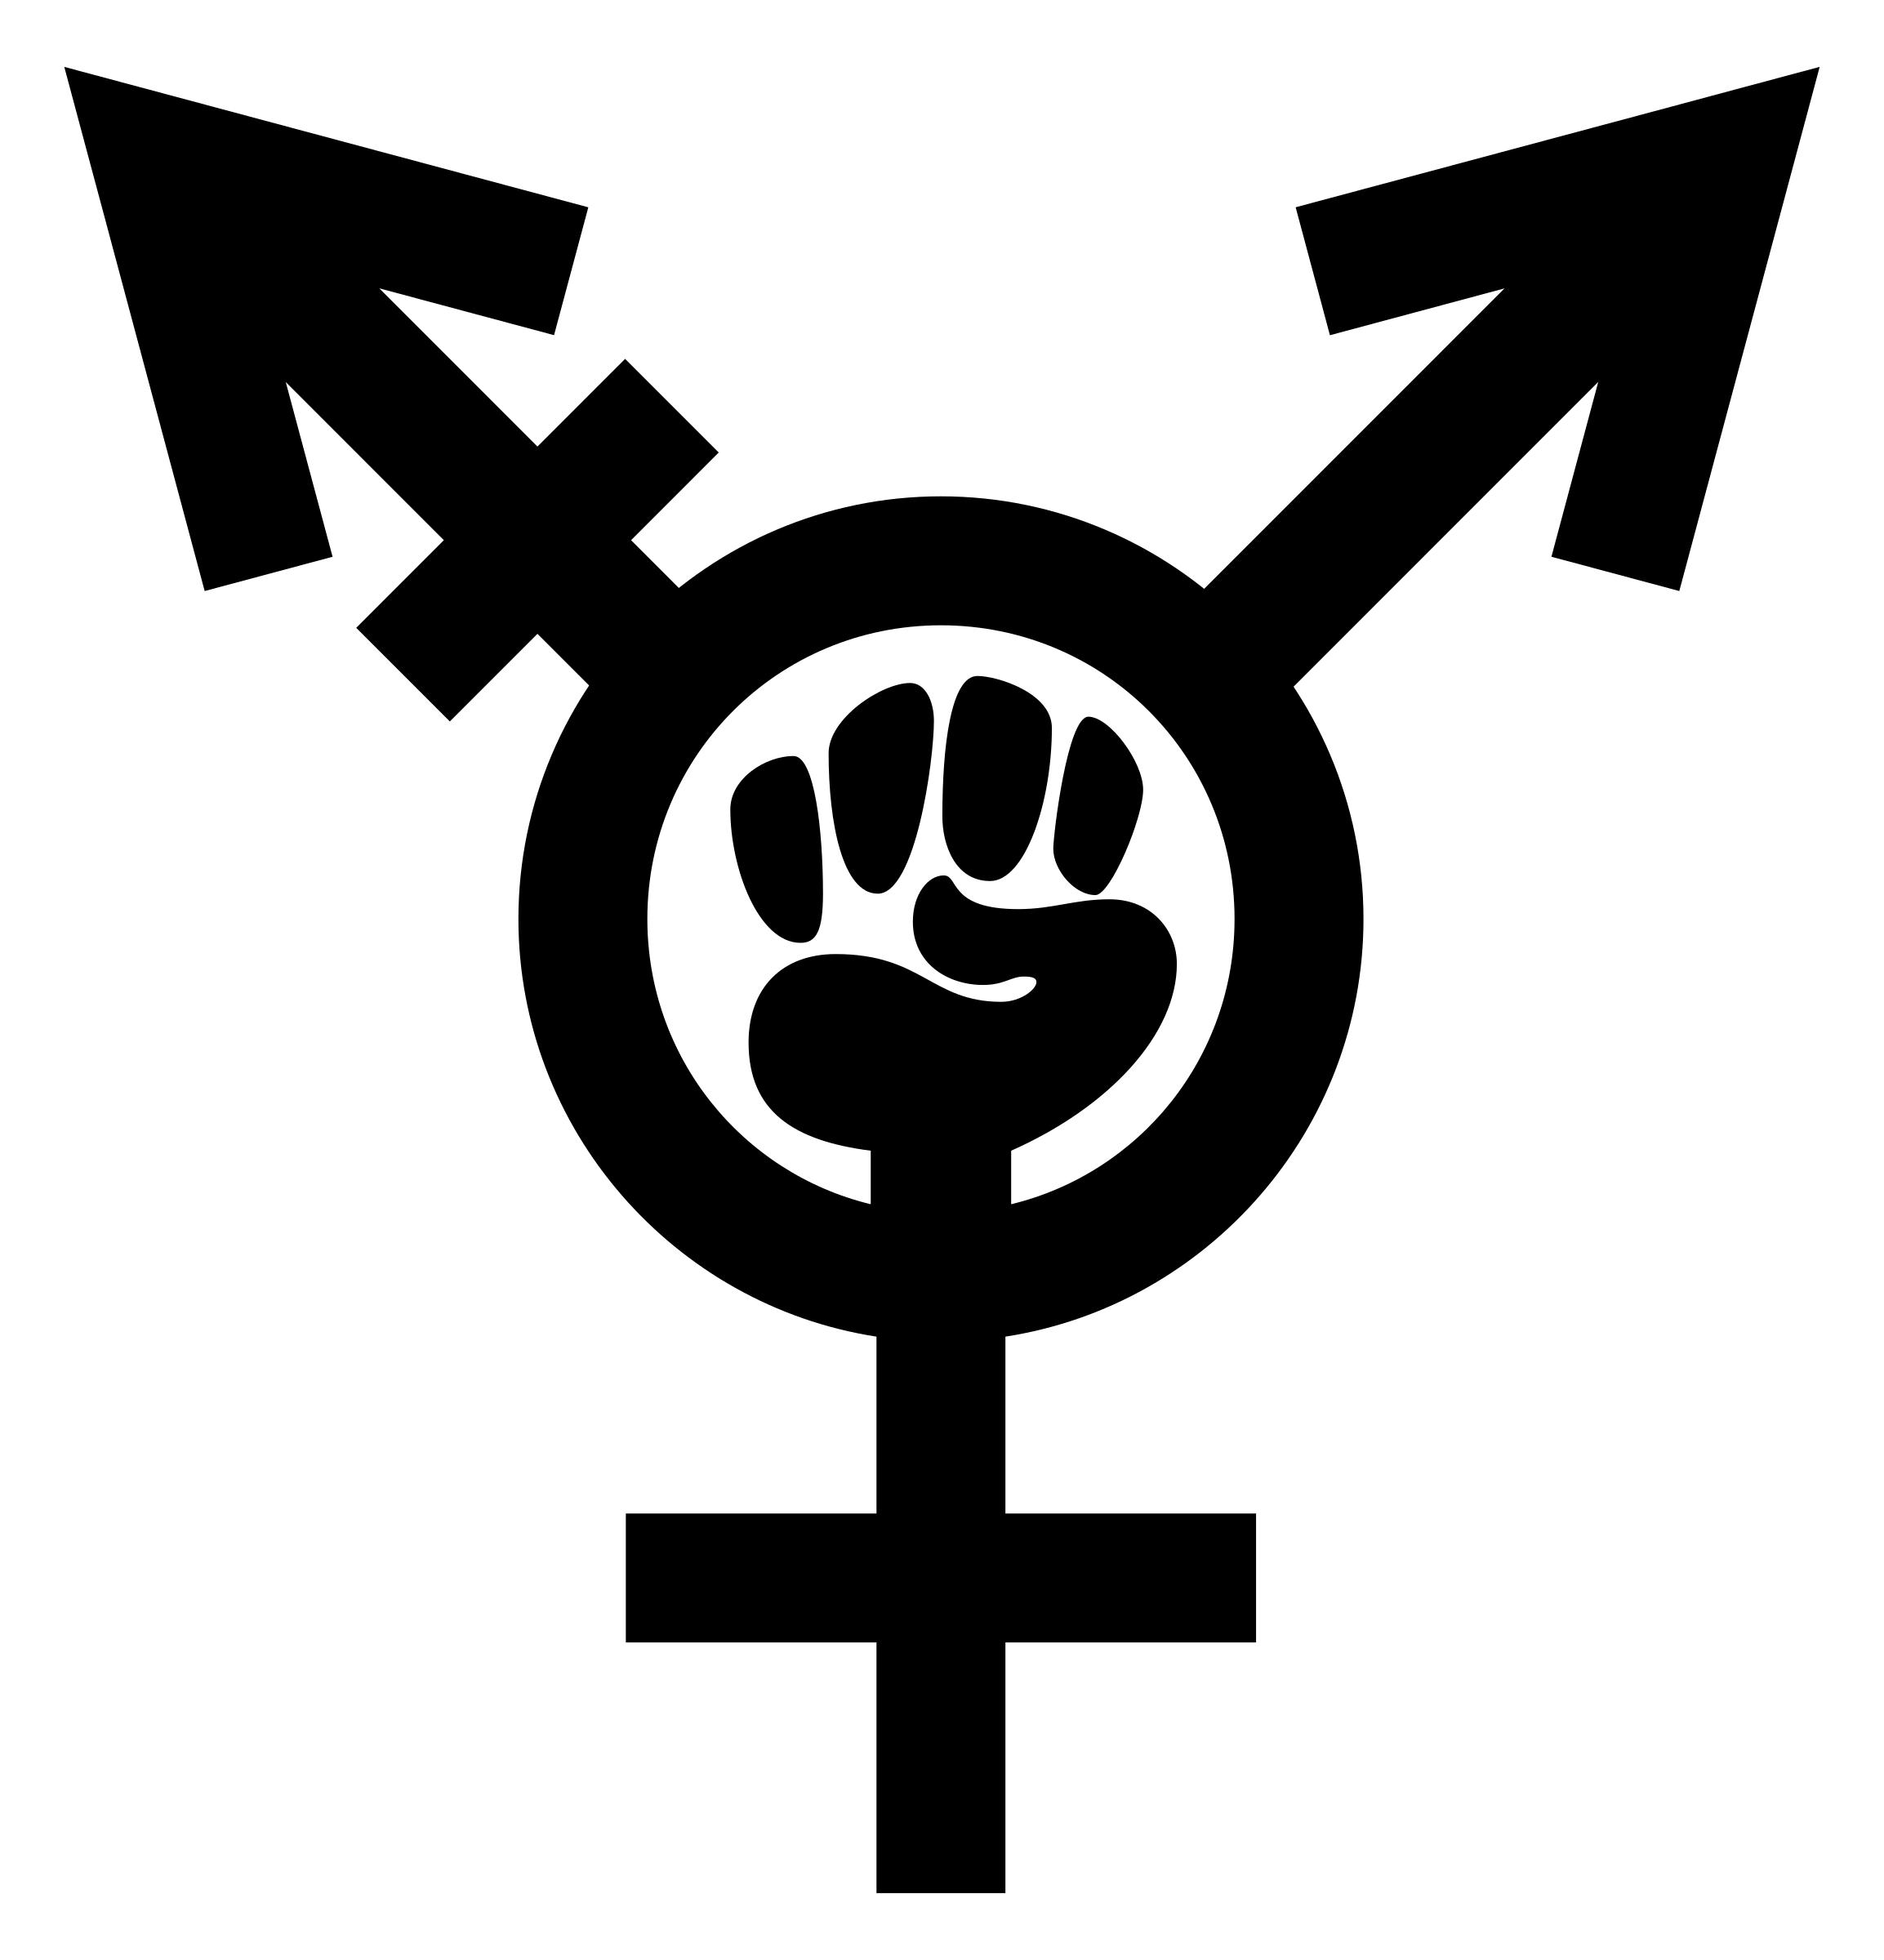 all genders - fight united png